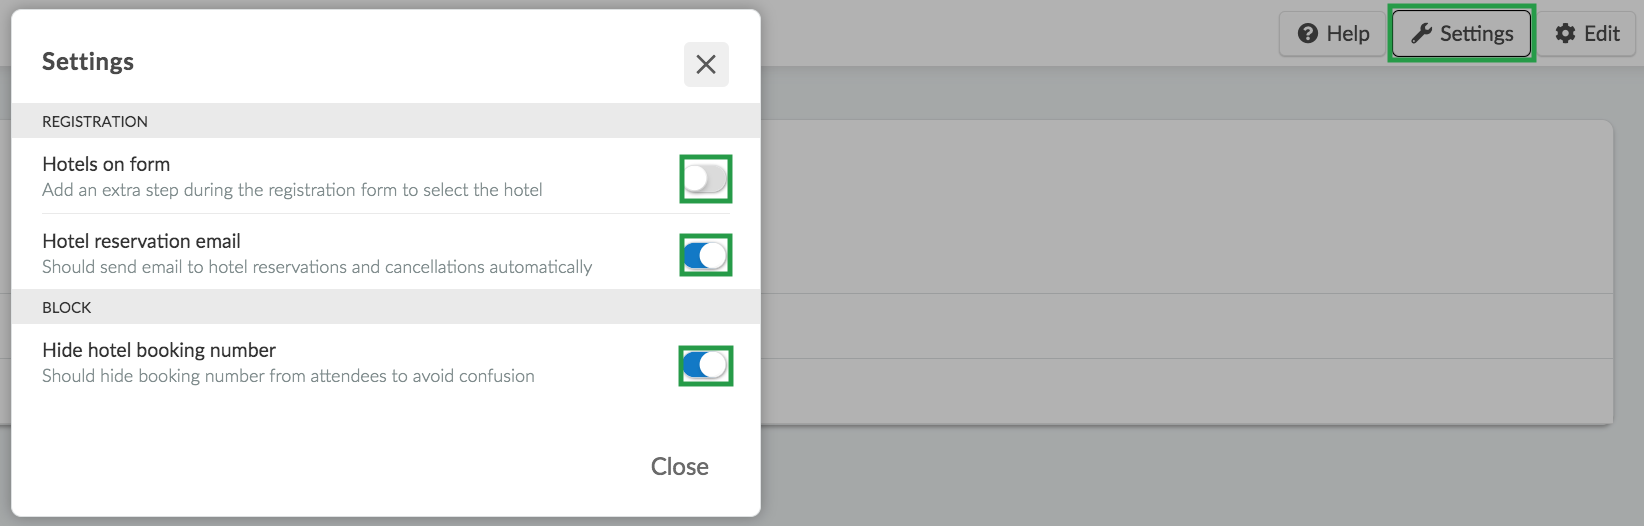 Image showing the Settings button with the relevant Settings on the Hotel management page 